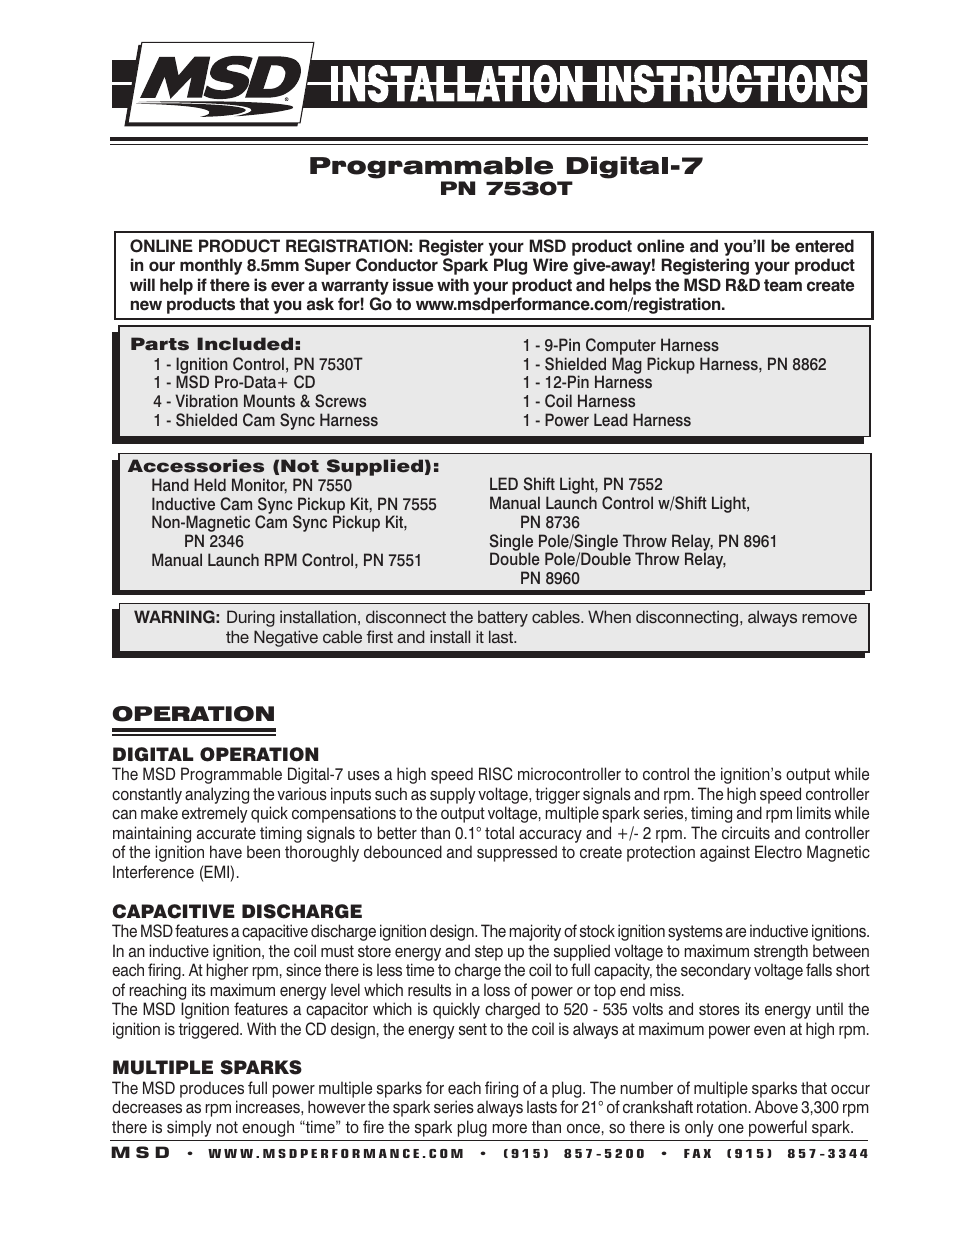 MSD 7530T Programmable Digital-7 Ignition Control Installation User Manual | 16 pages